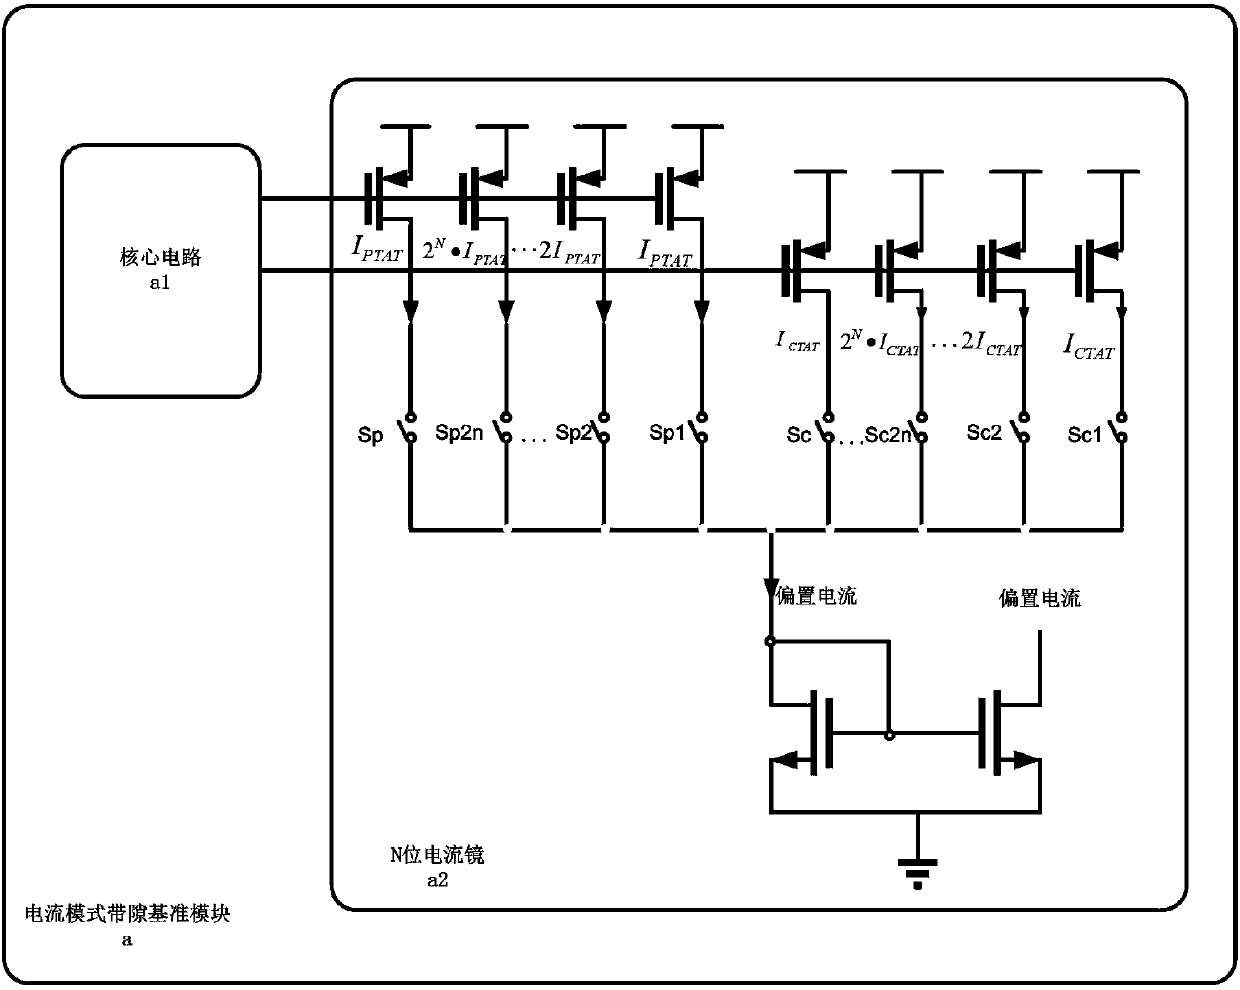 Clock generator with temperature compensation and process error correction functions